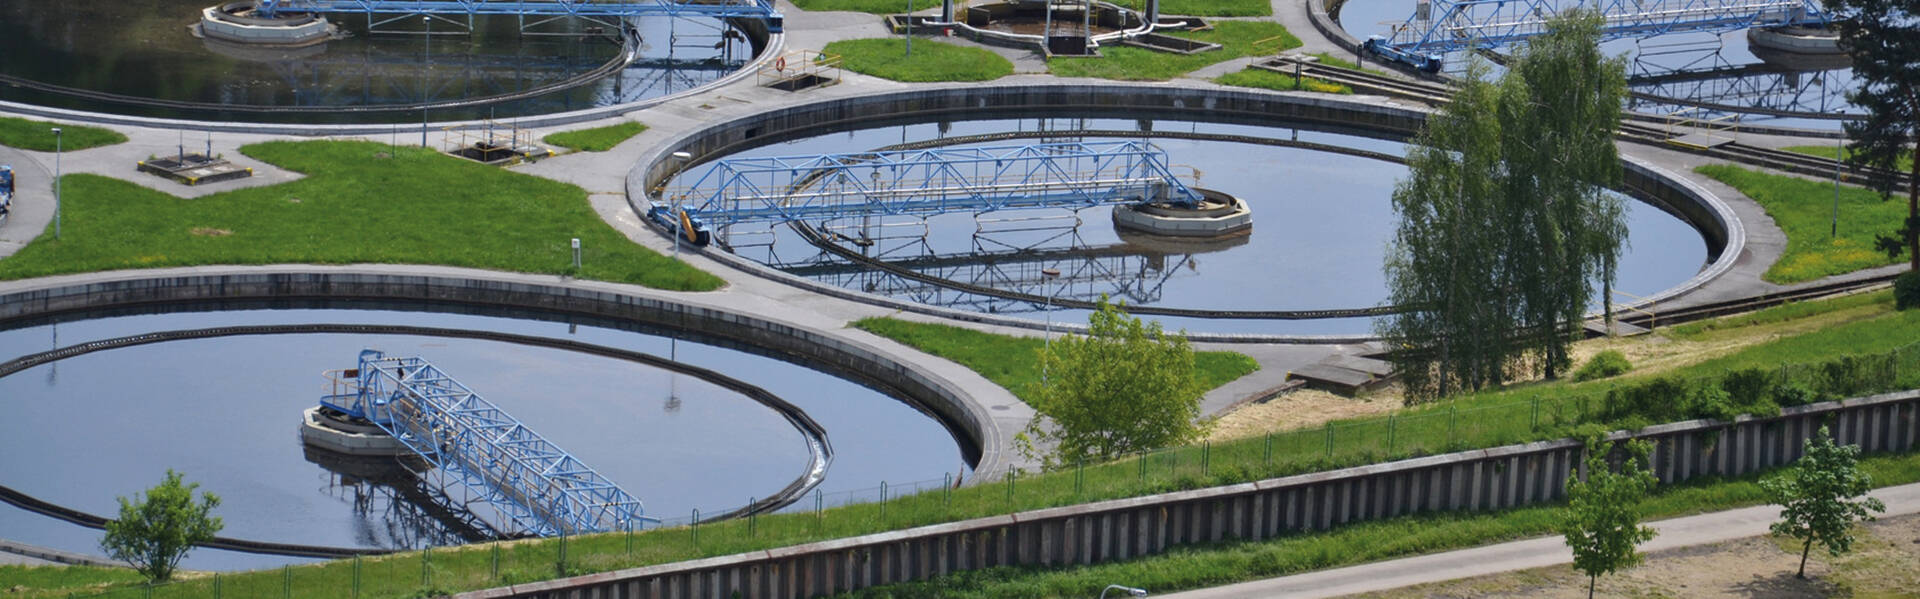 Duty to upgrade sewage treatments should be expanded